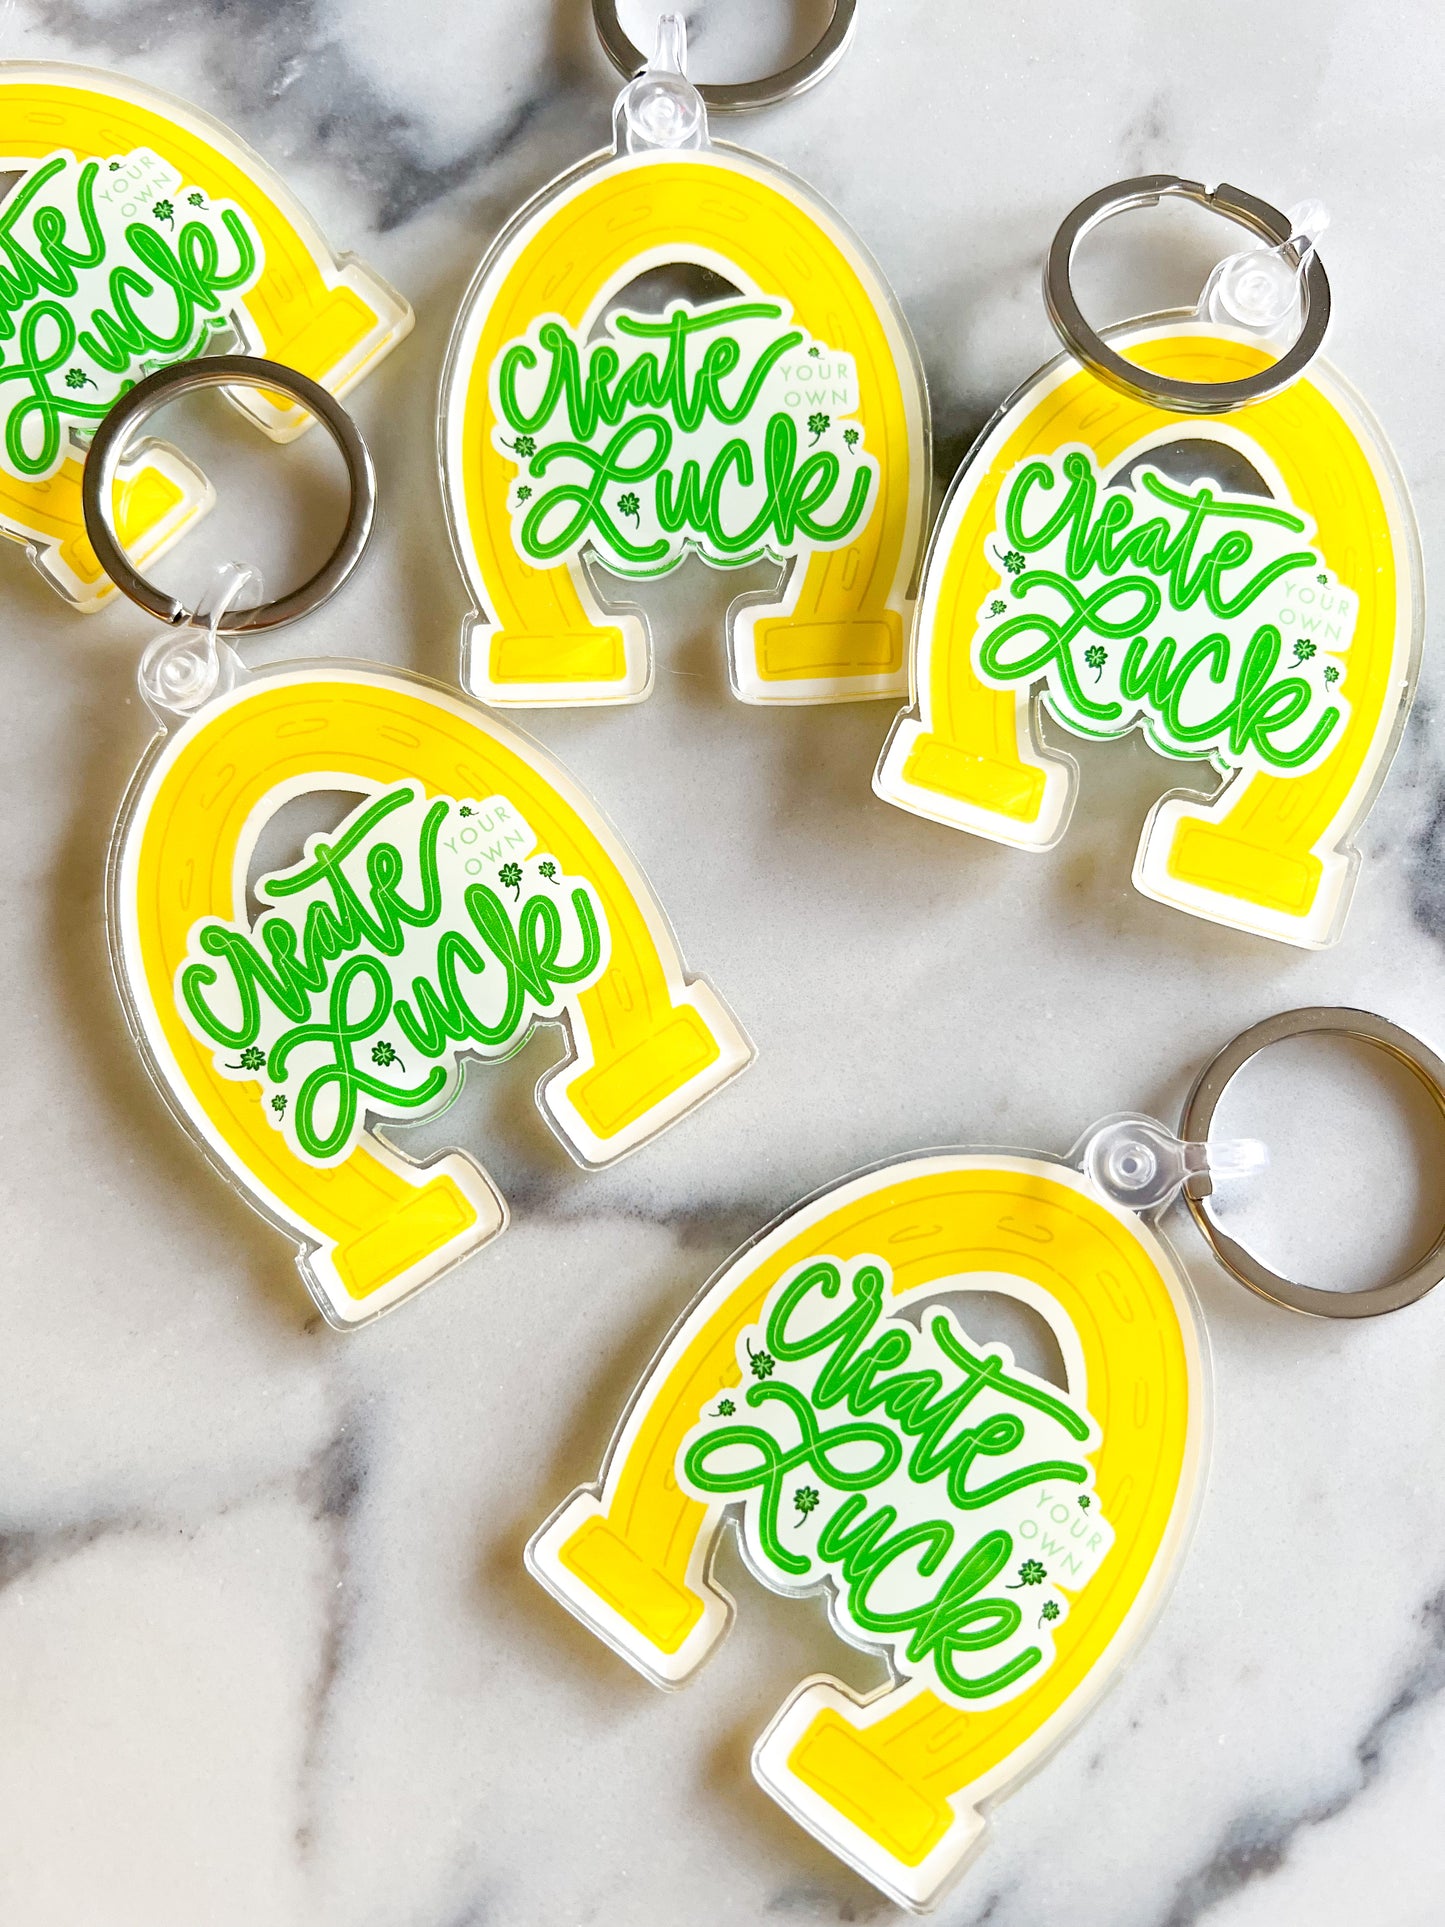 Create your own luck keychain